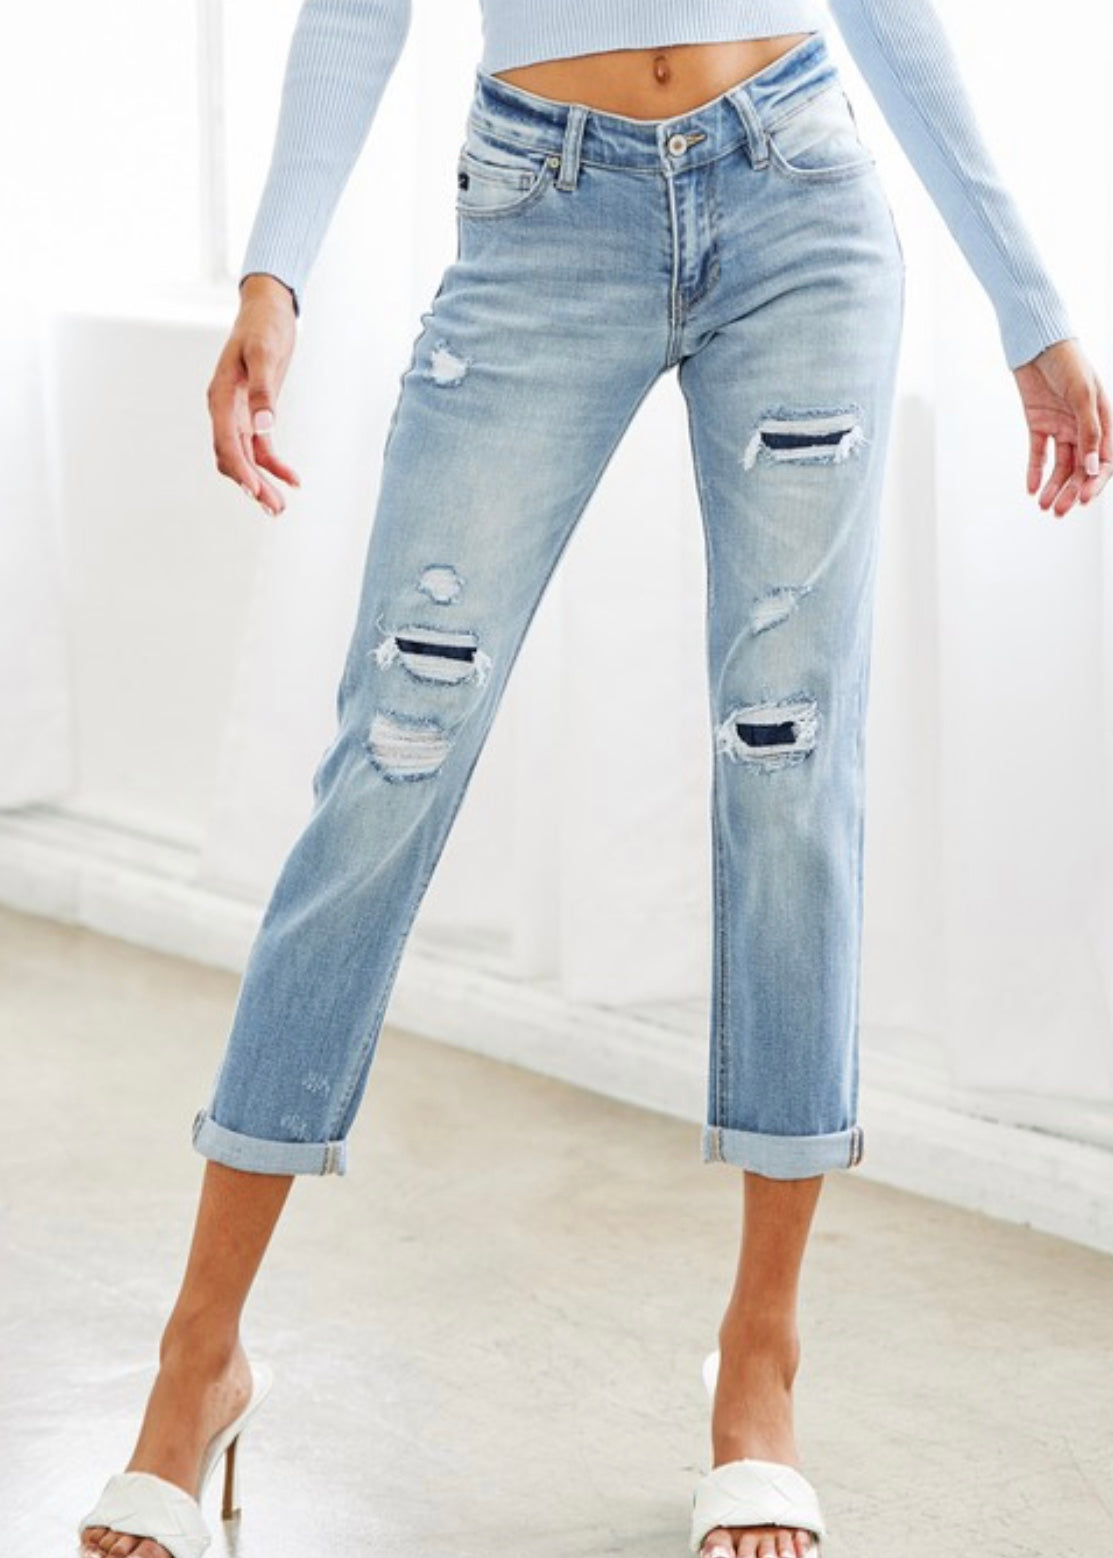 KanCan mid rise cuff Amy jeans